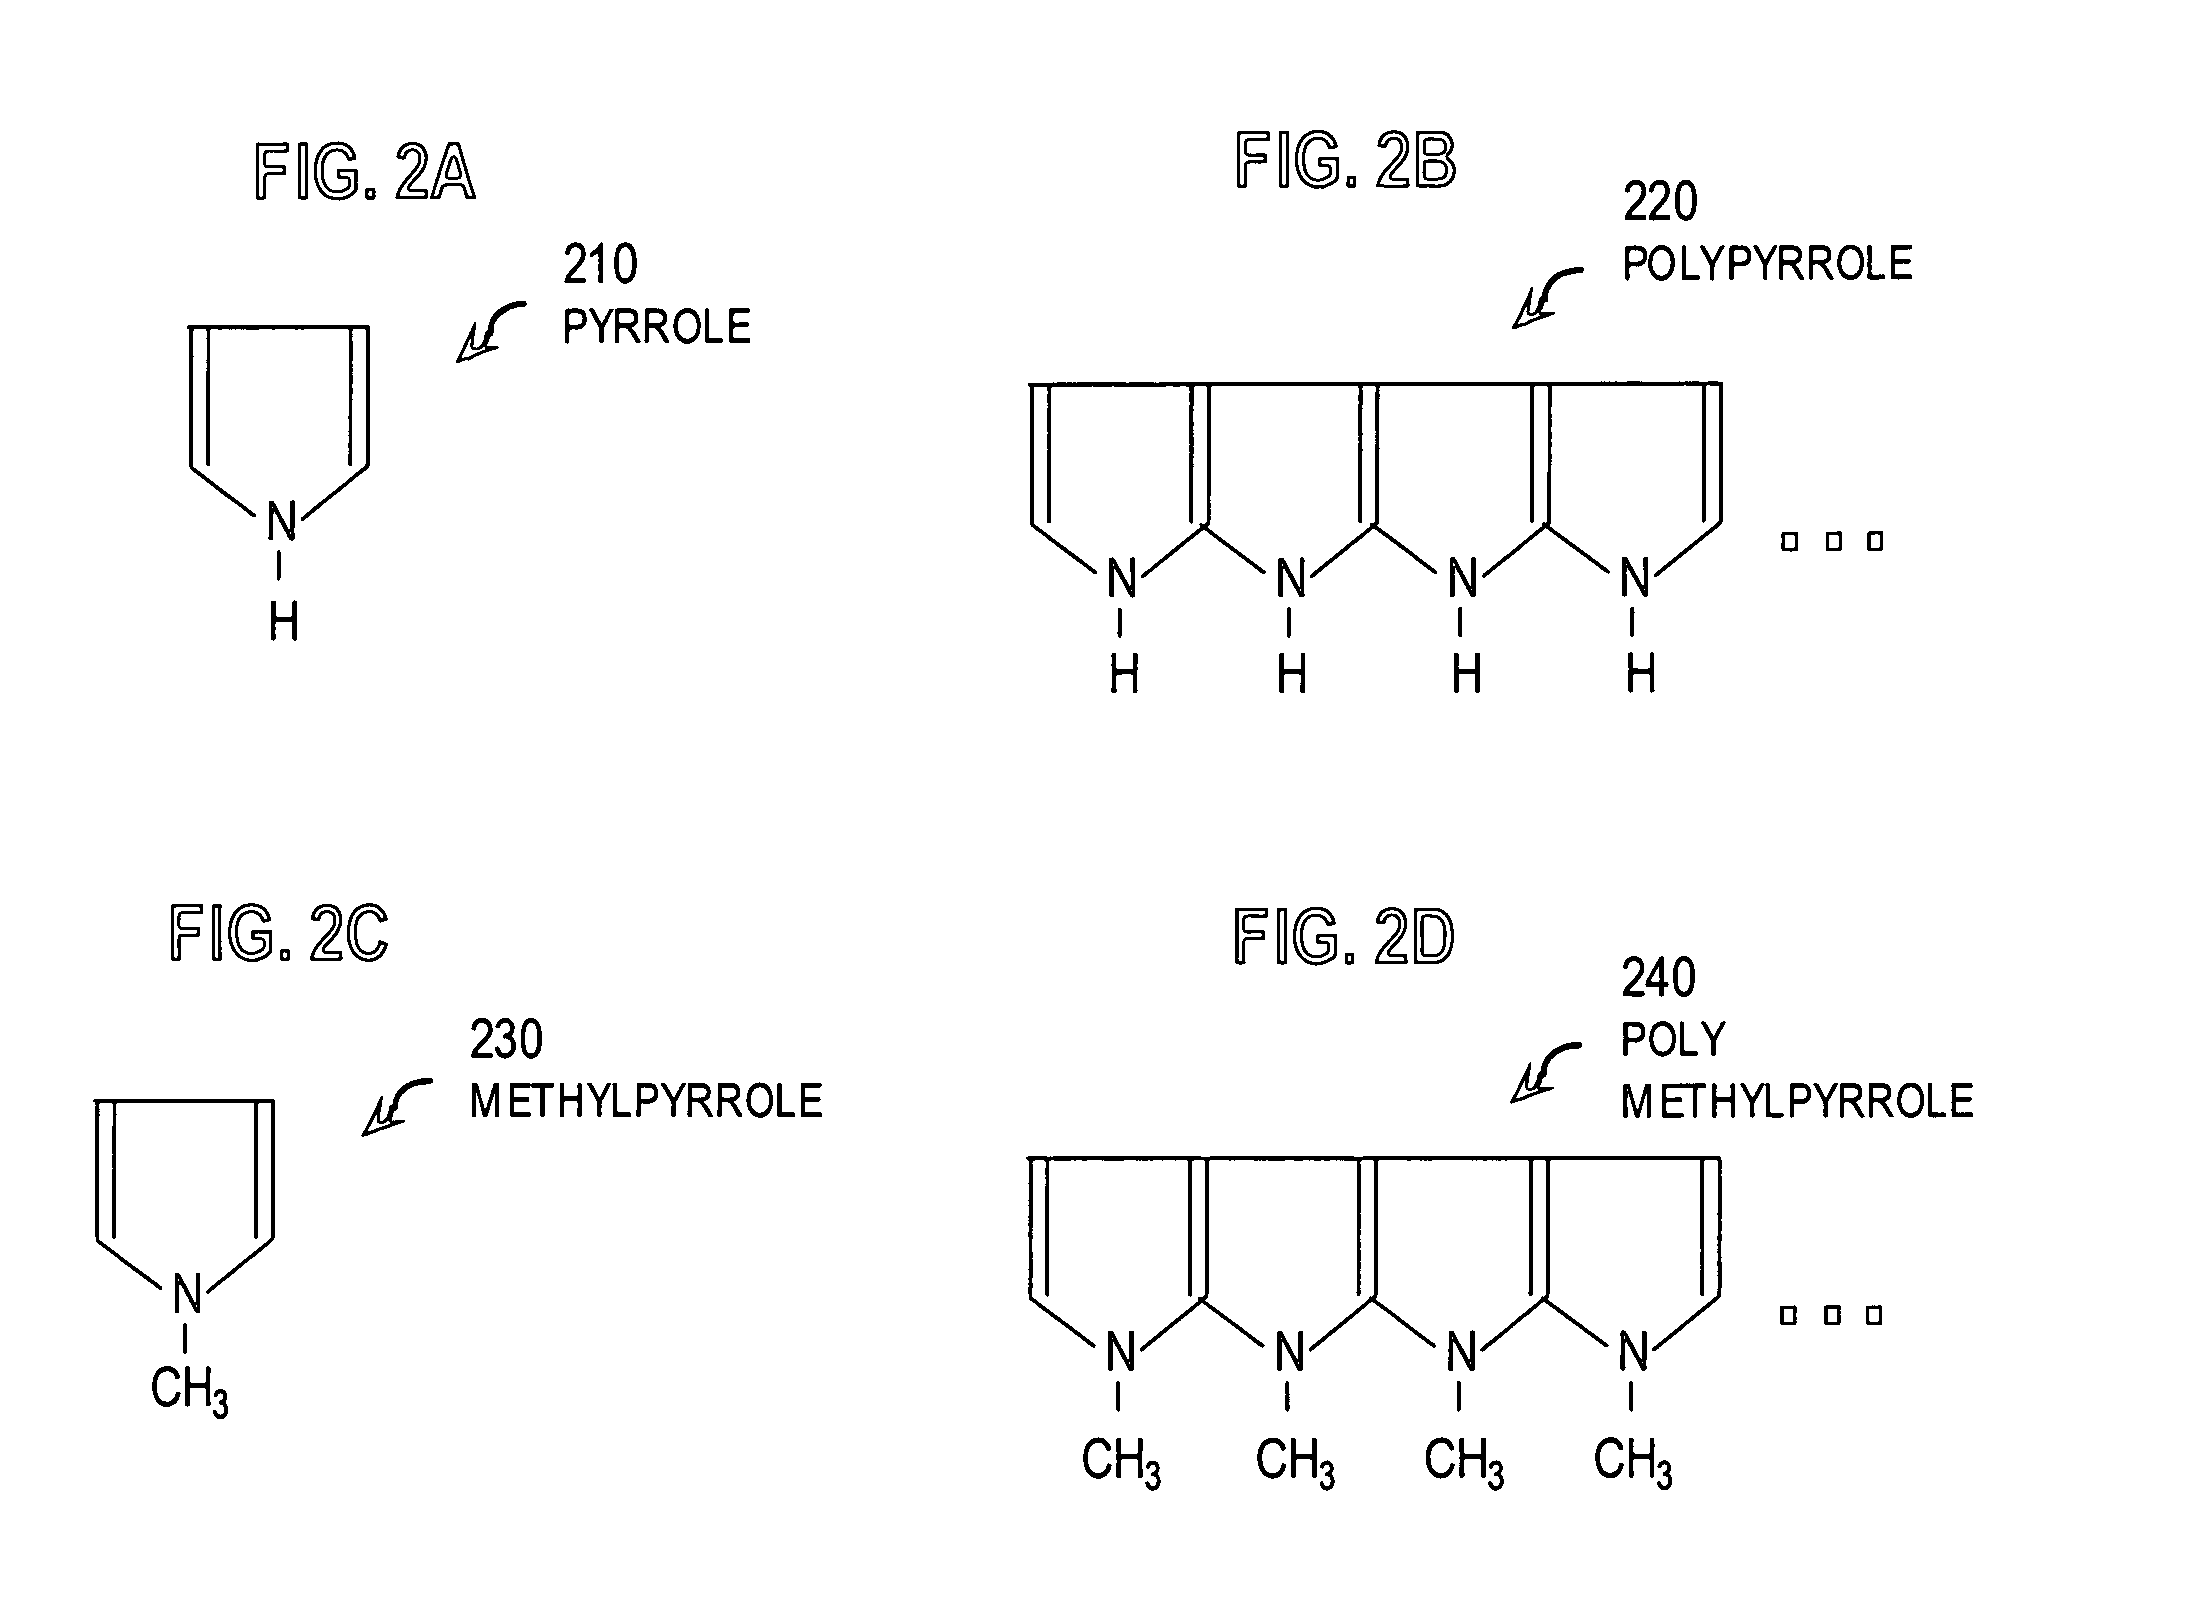 Techniques for sensing chloride ions in wet or dry media